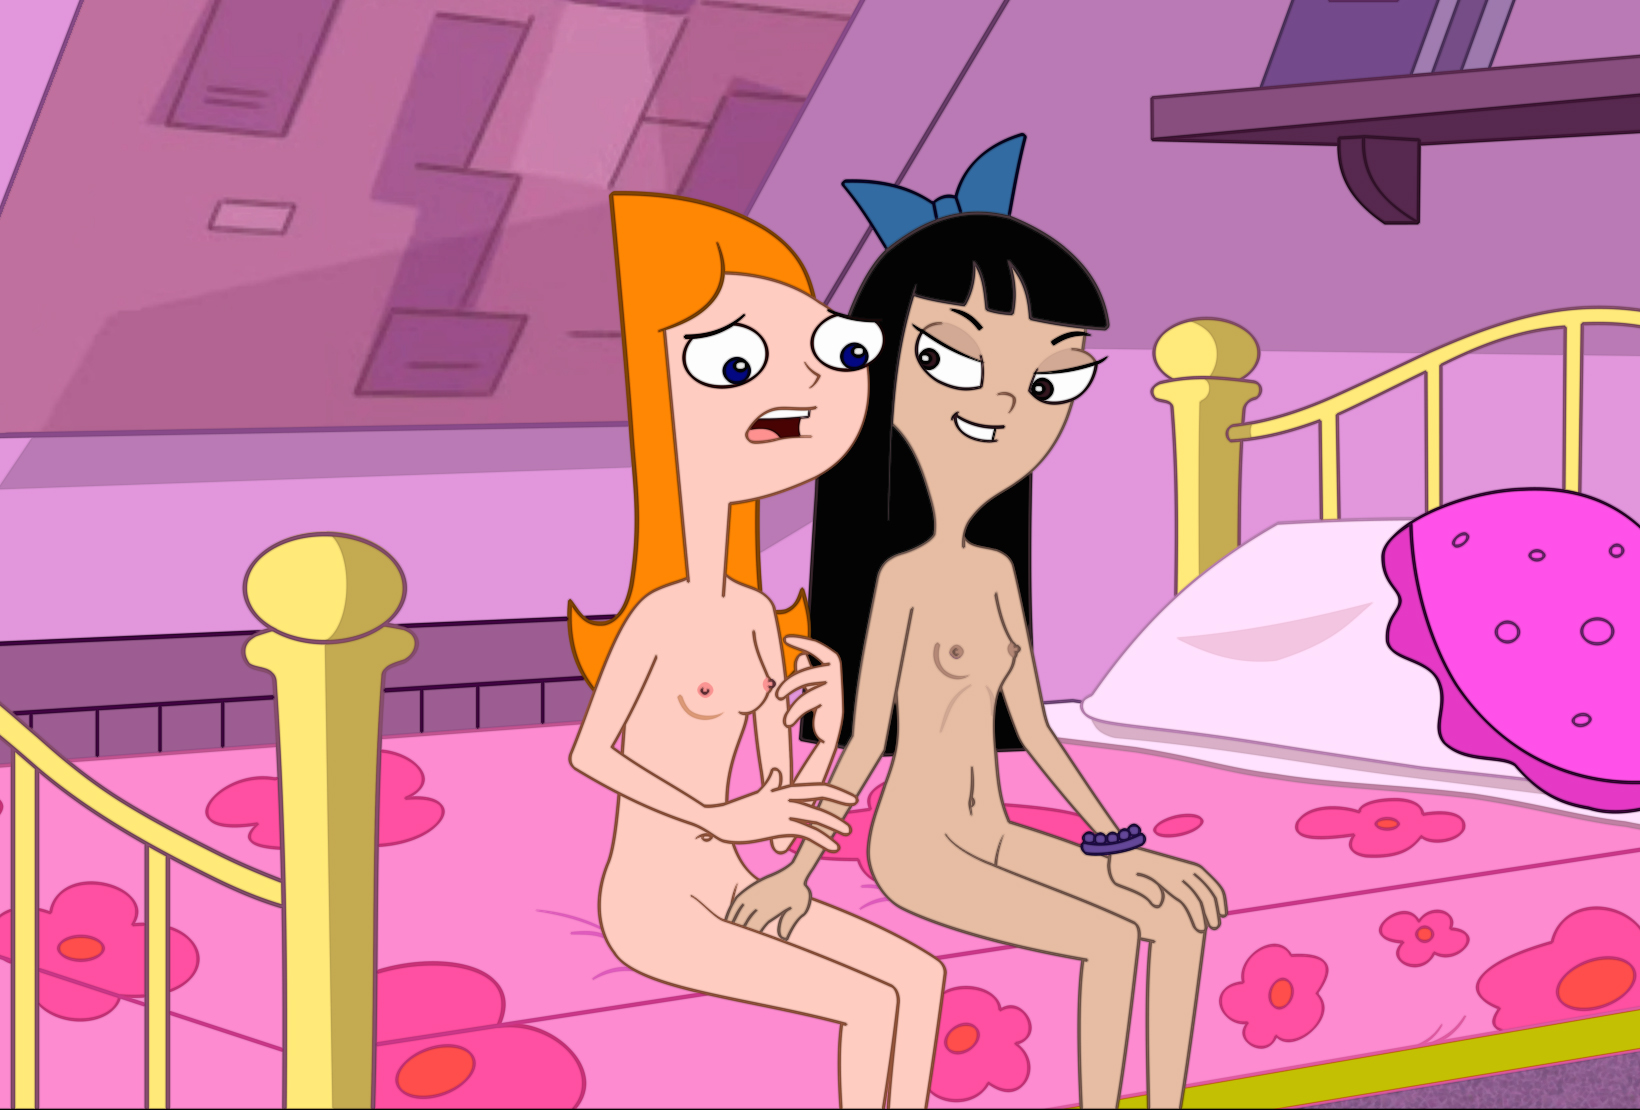 587.51KB , 1640x1110 , 1133674 - Candace_Flynn Phineas_and_Ferb Stacy_Hir.j...